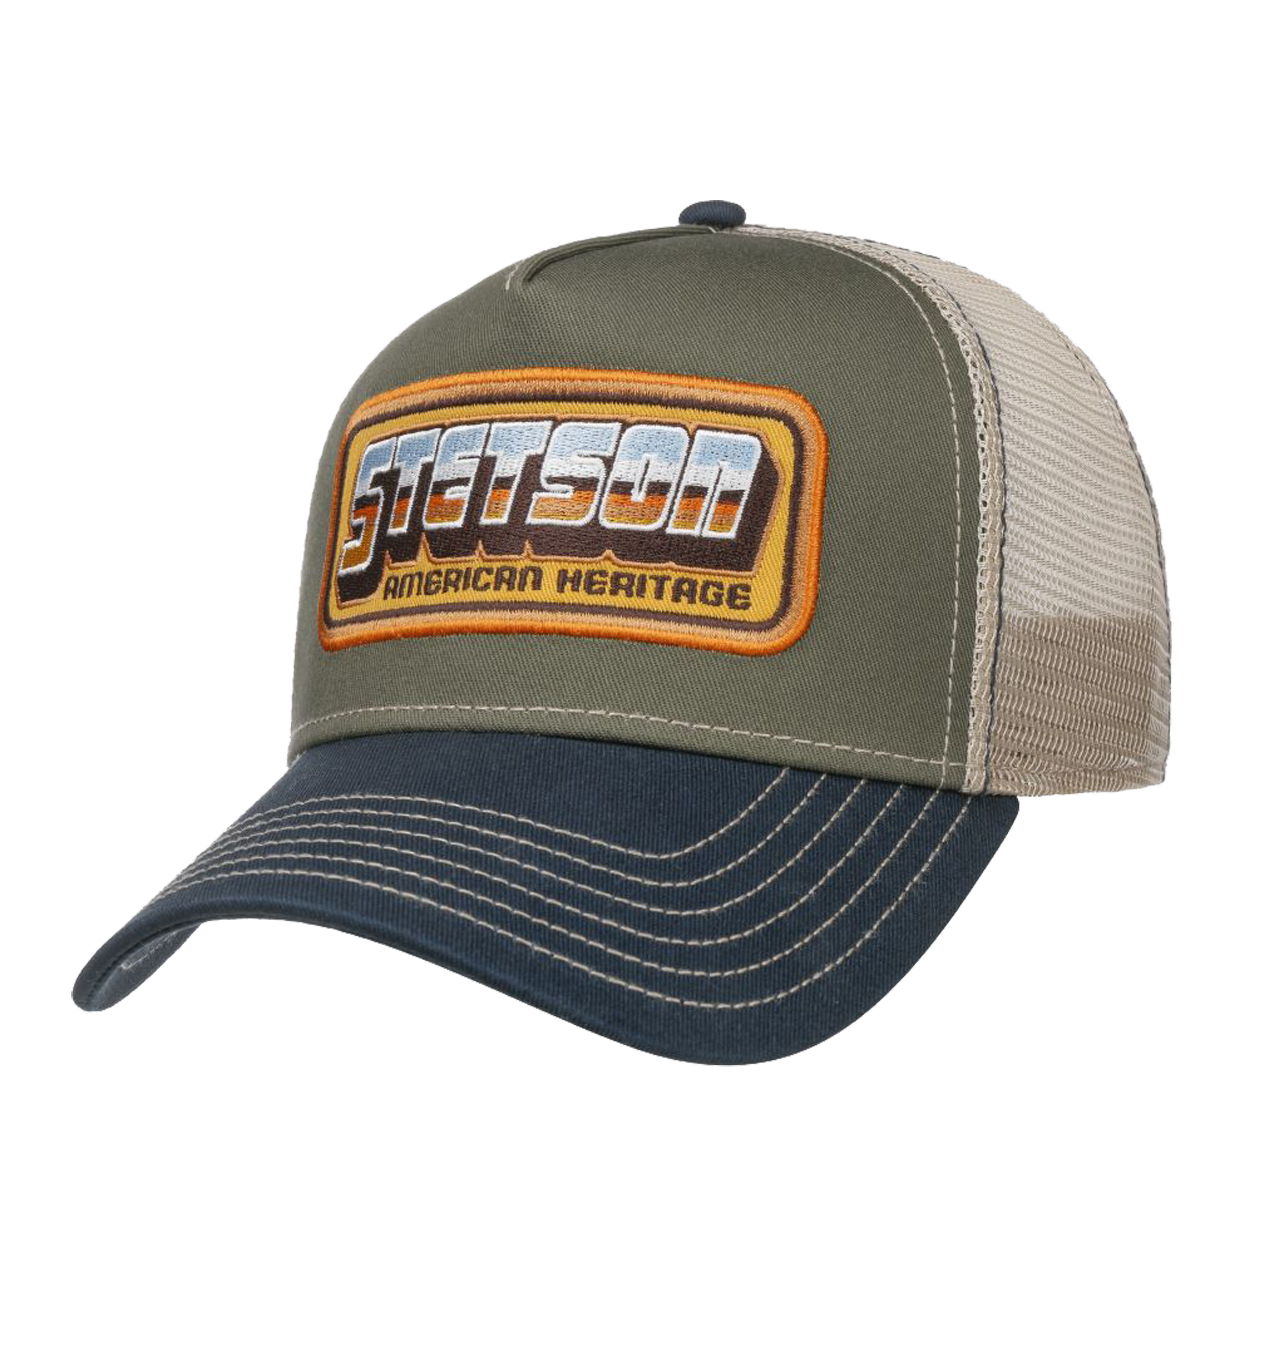 Stetson---American-Heritage-Patch-Trucker-Cap---Olive-1